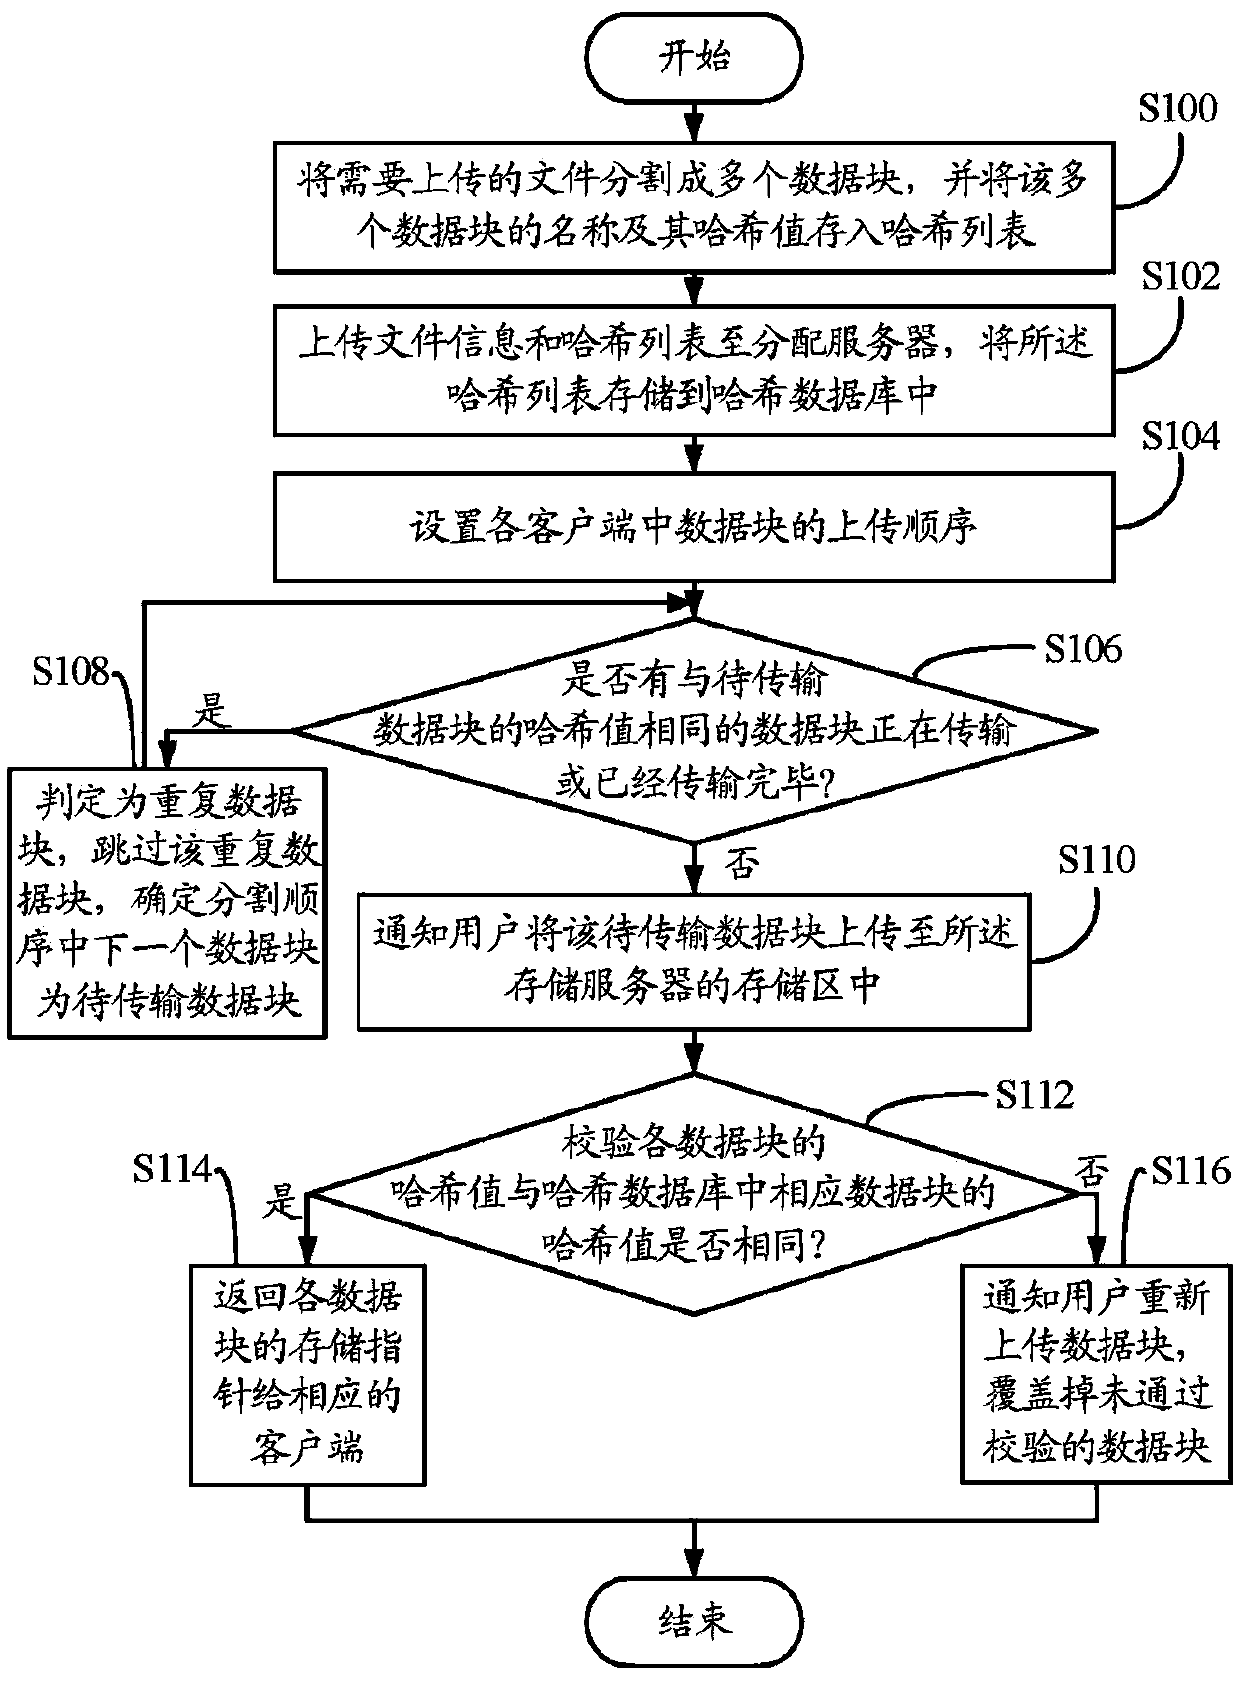 Data block uploading and storing system and method